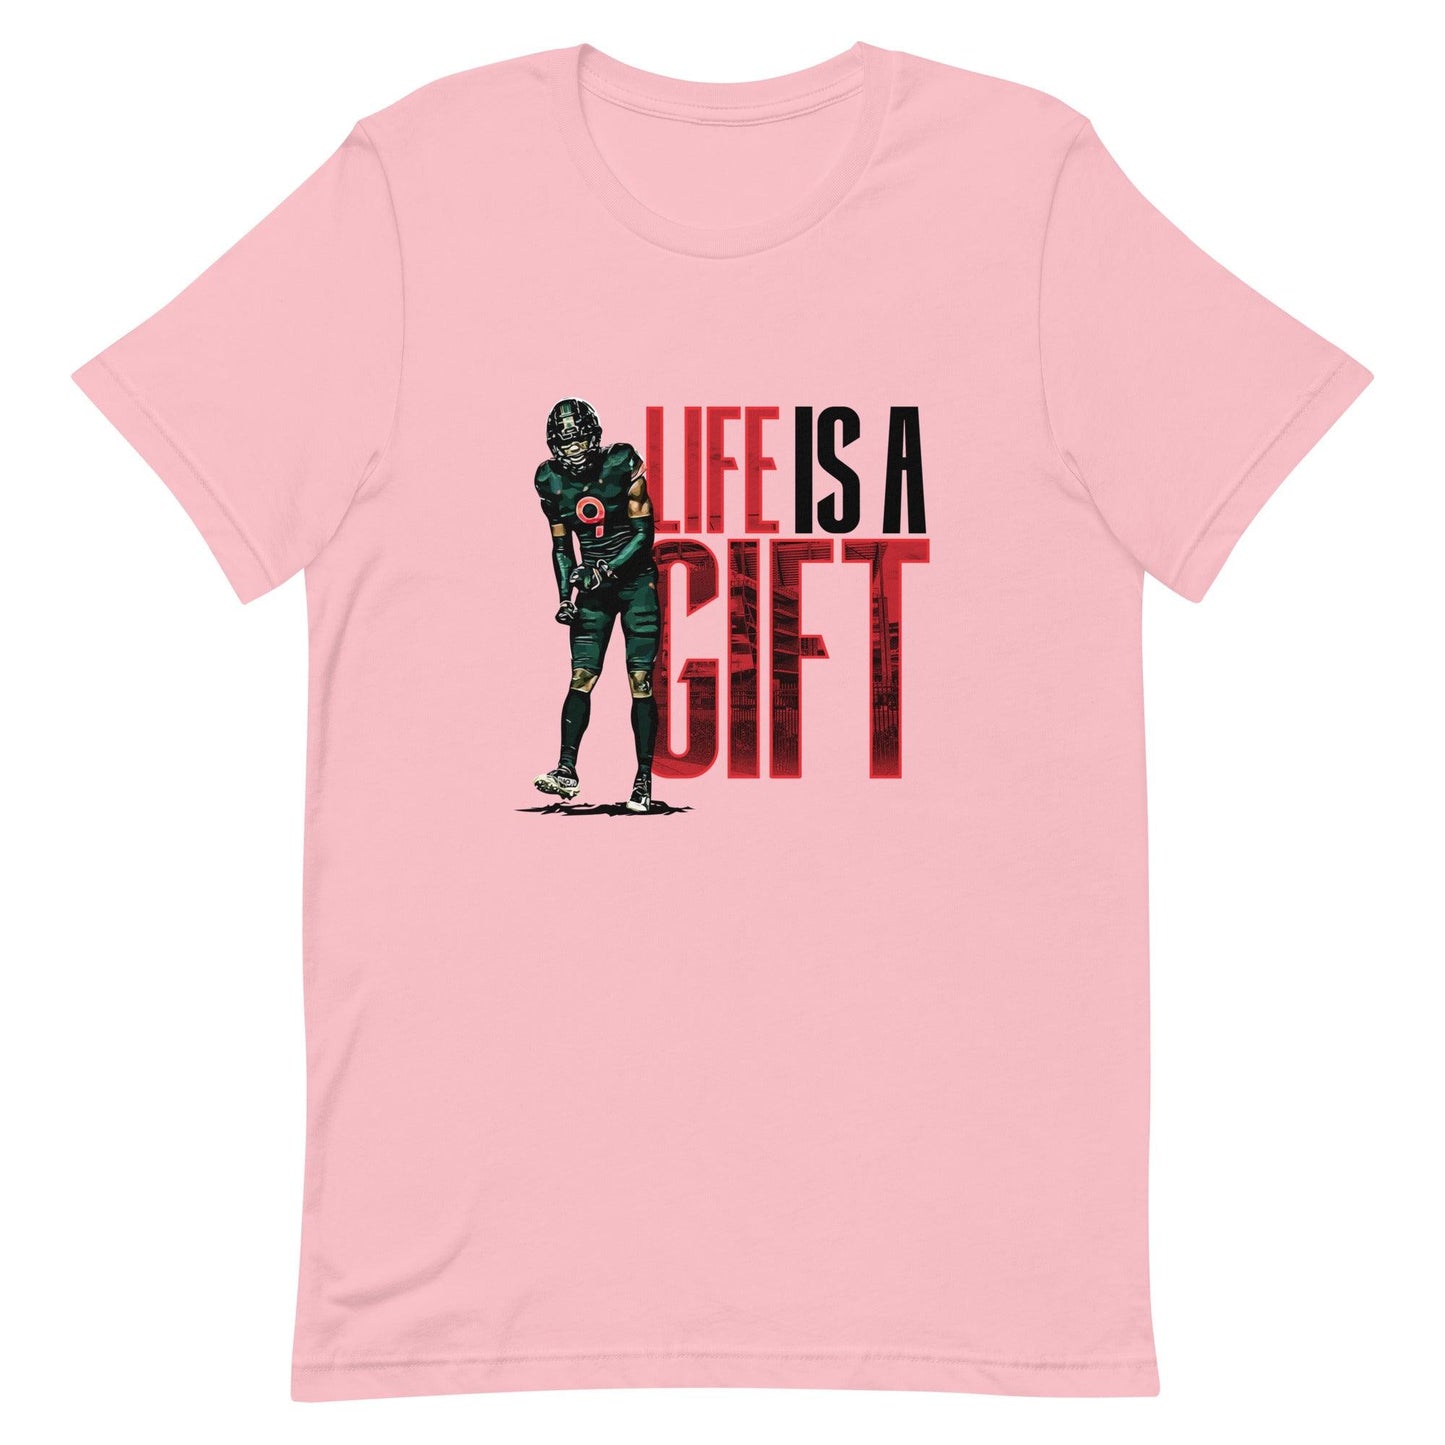 Avery Huff Jr. “Gifted” t-shirt - Fan Arch